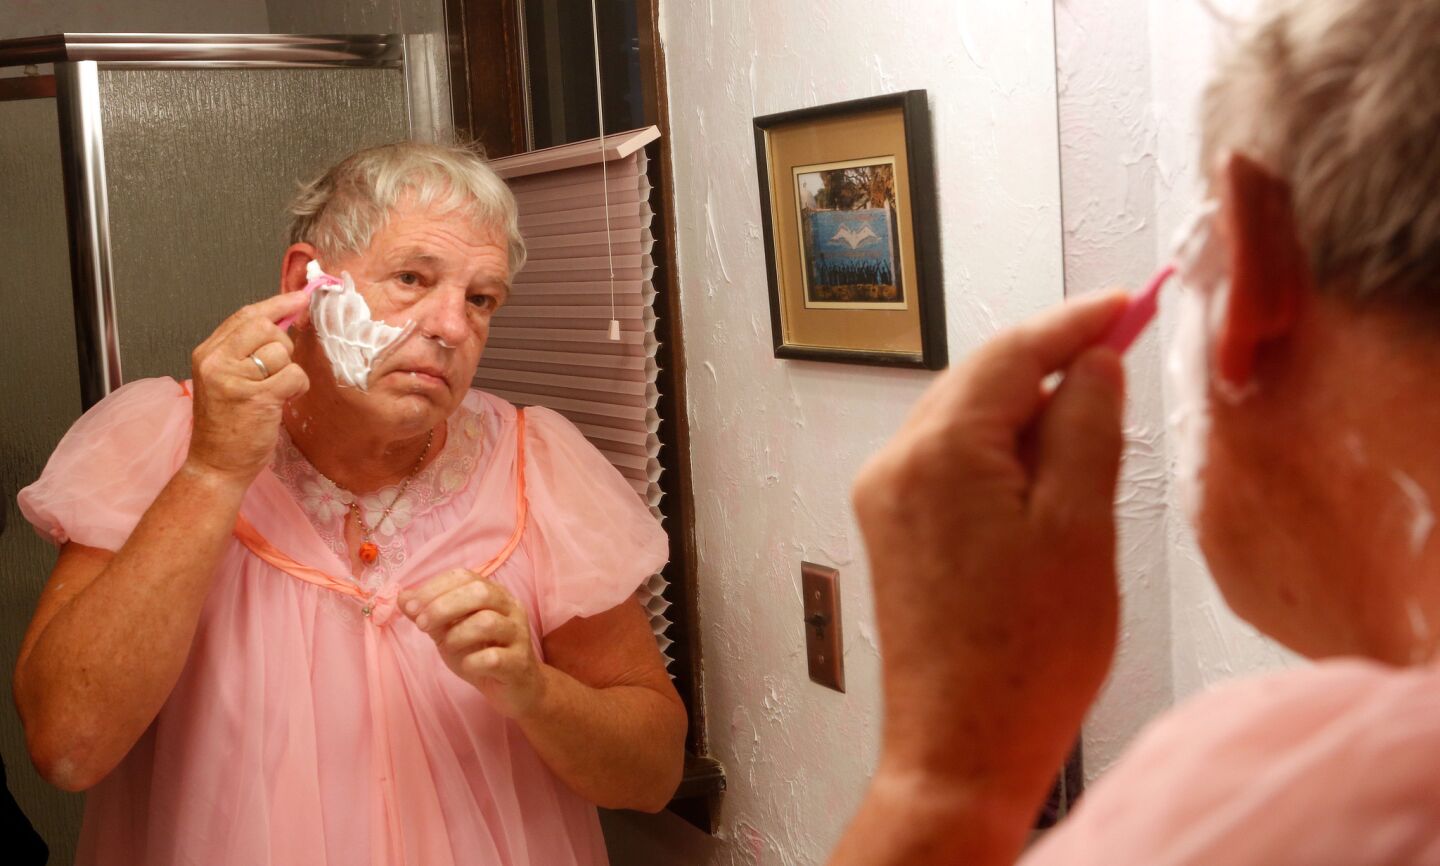 Goodwin, wearing the pink nightgown he sleeps in, shaves before breakfast at home in Douglas, Wyo., the town where he was born.